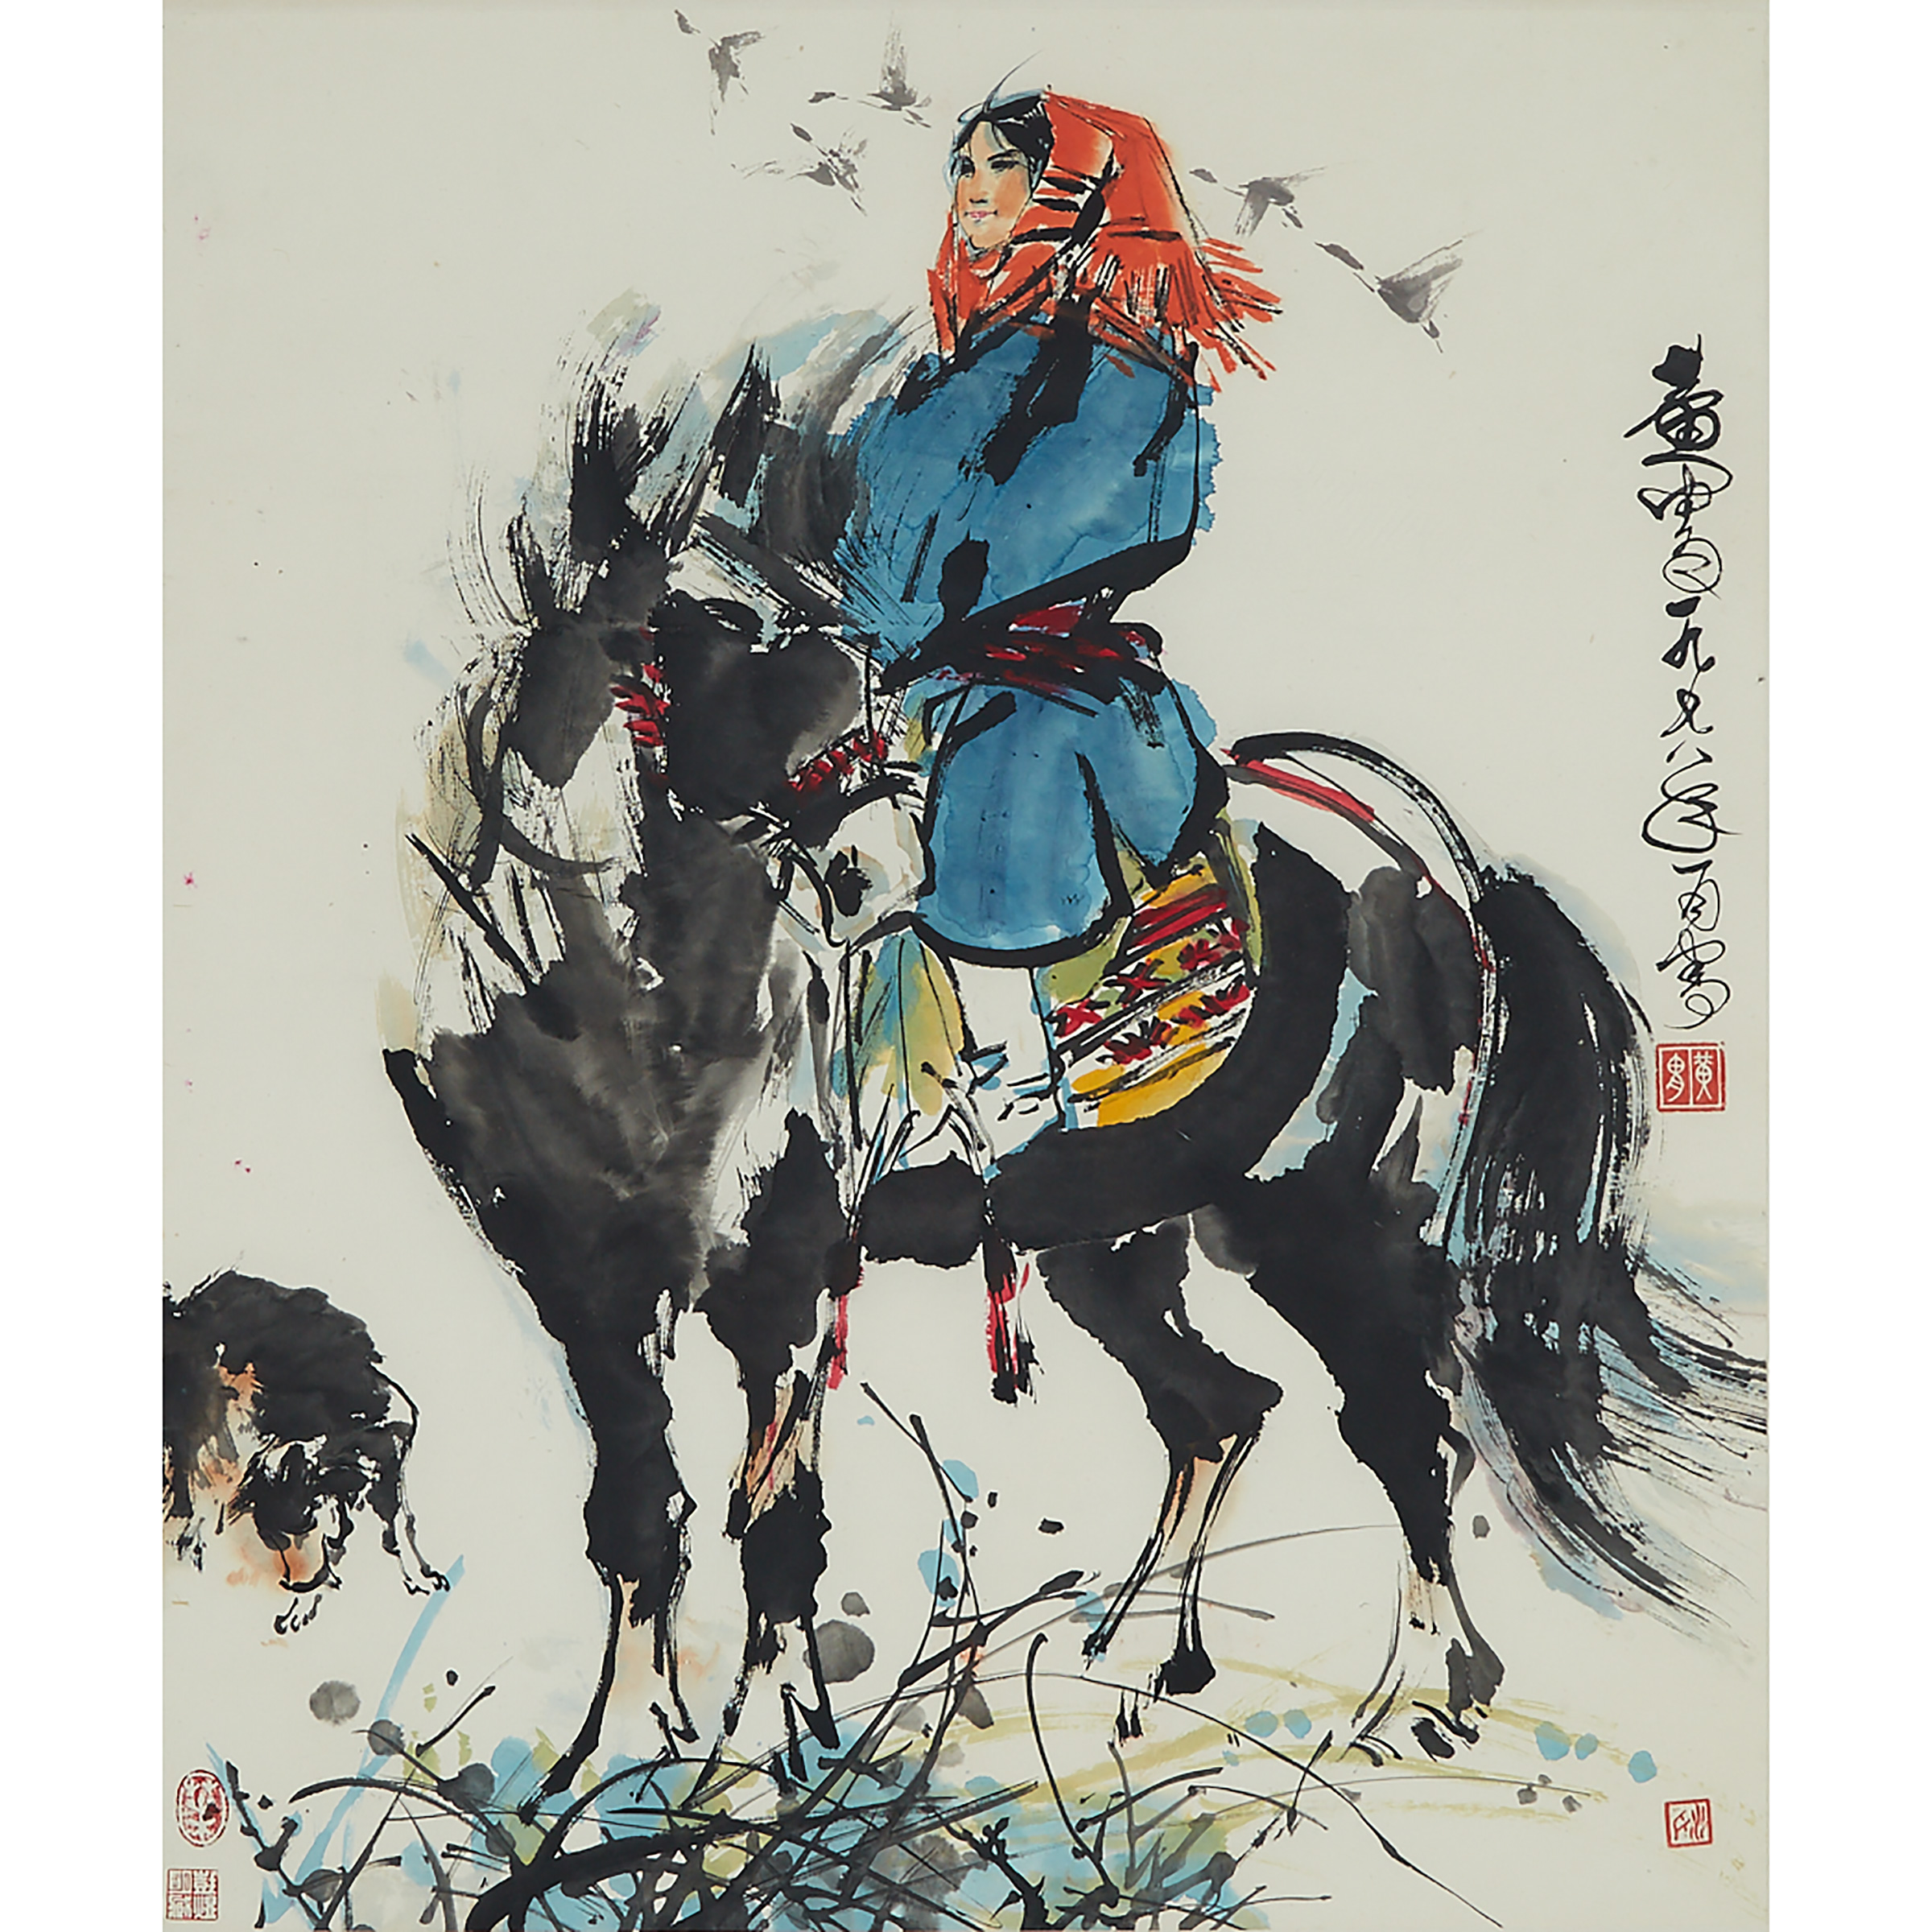 Attributed to Huang Zhou (1925-1997), Donkey Rider